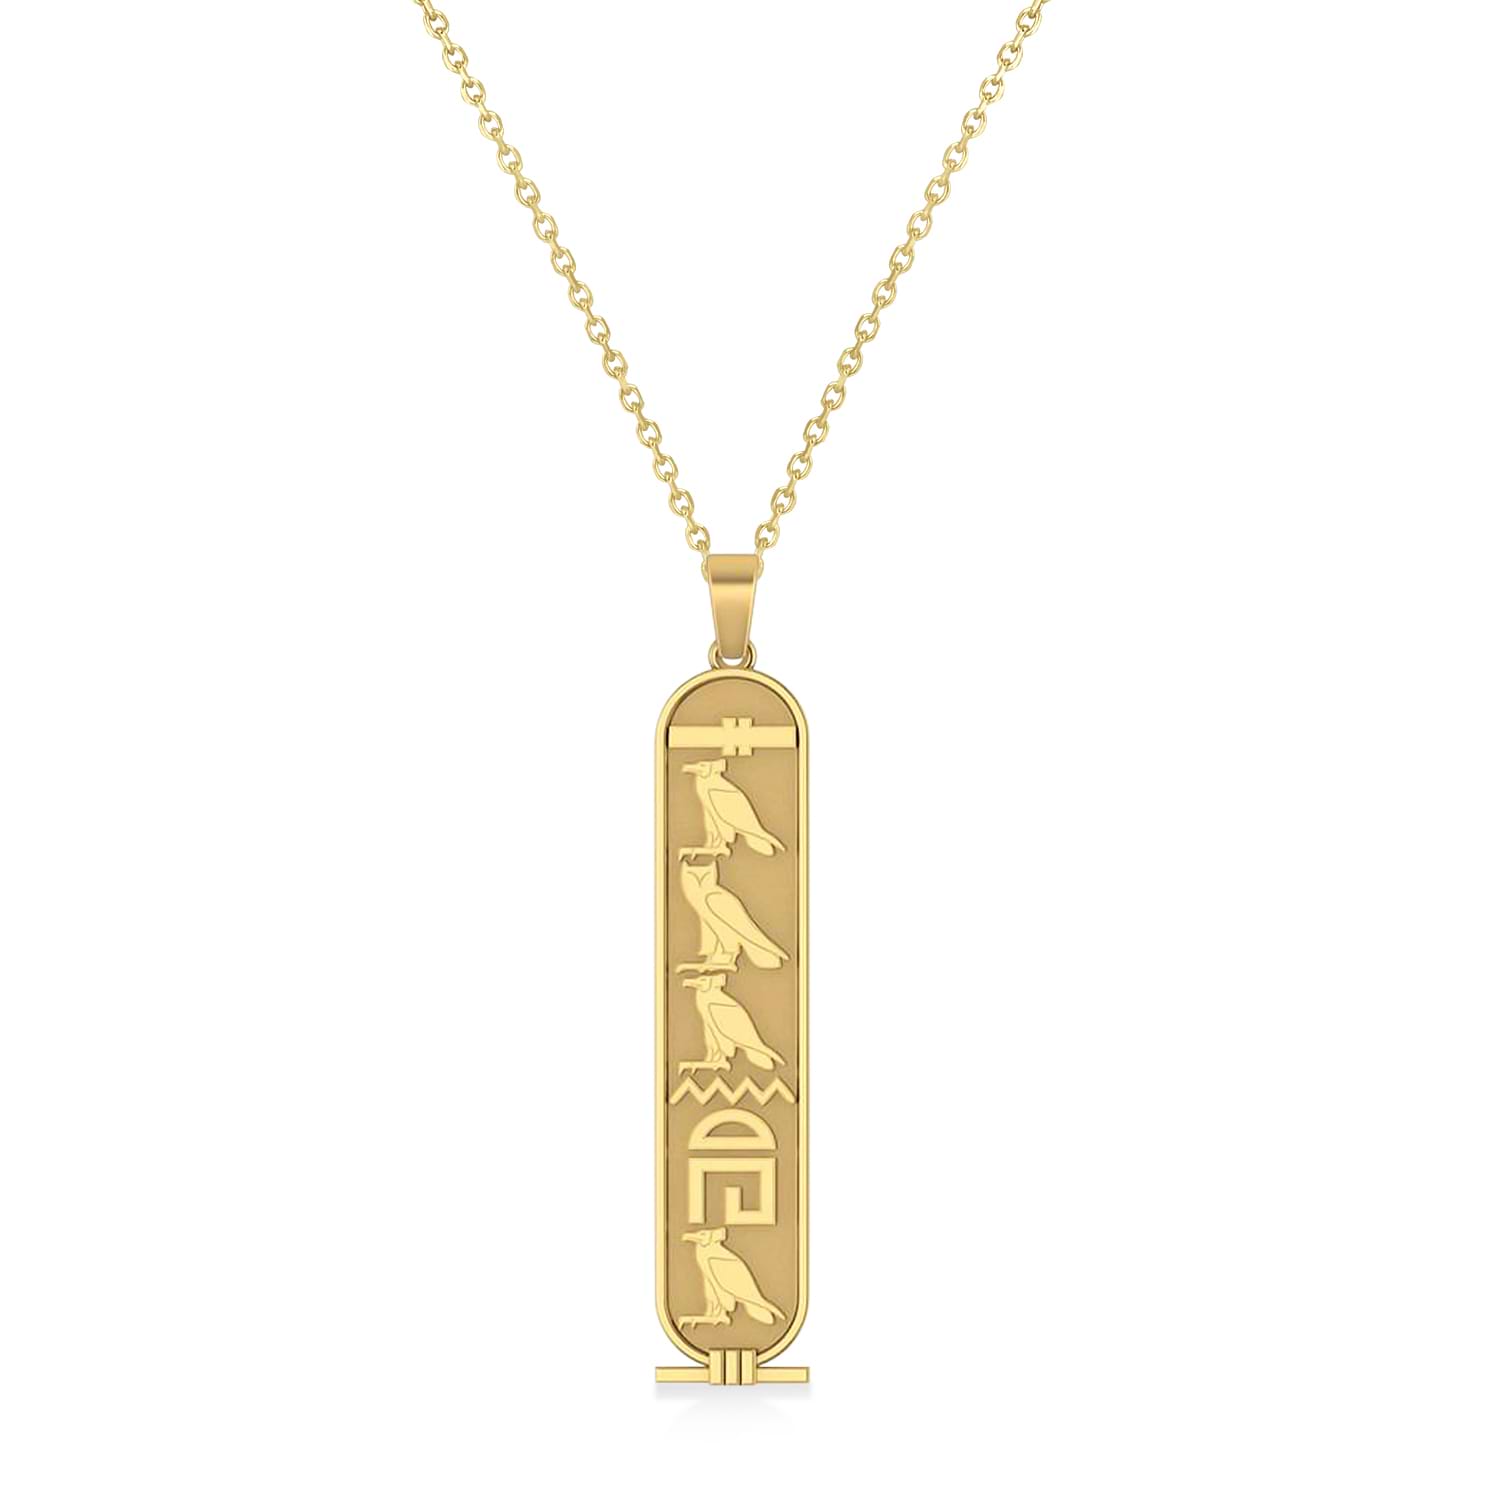 Necklace Cartouche Personalized Egyptian Jewelry, 3 Favorite Names in  Hieroglyphic, English or Arabic,on 3 Sides Sterling Silver Gold Plated -  Etsy